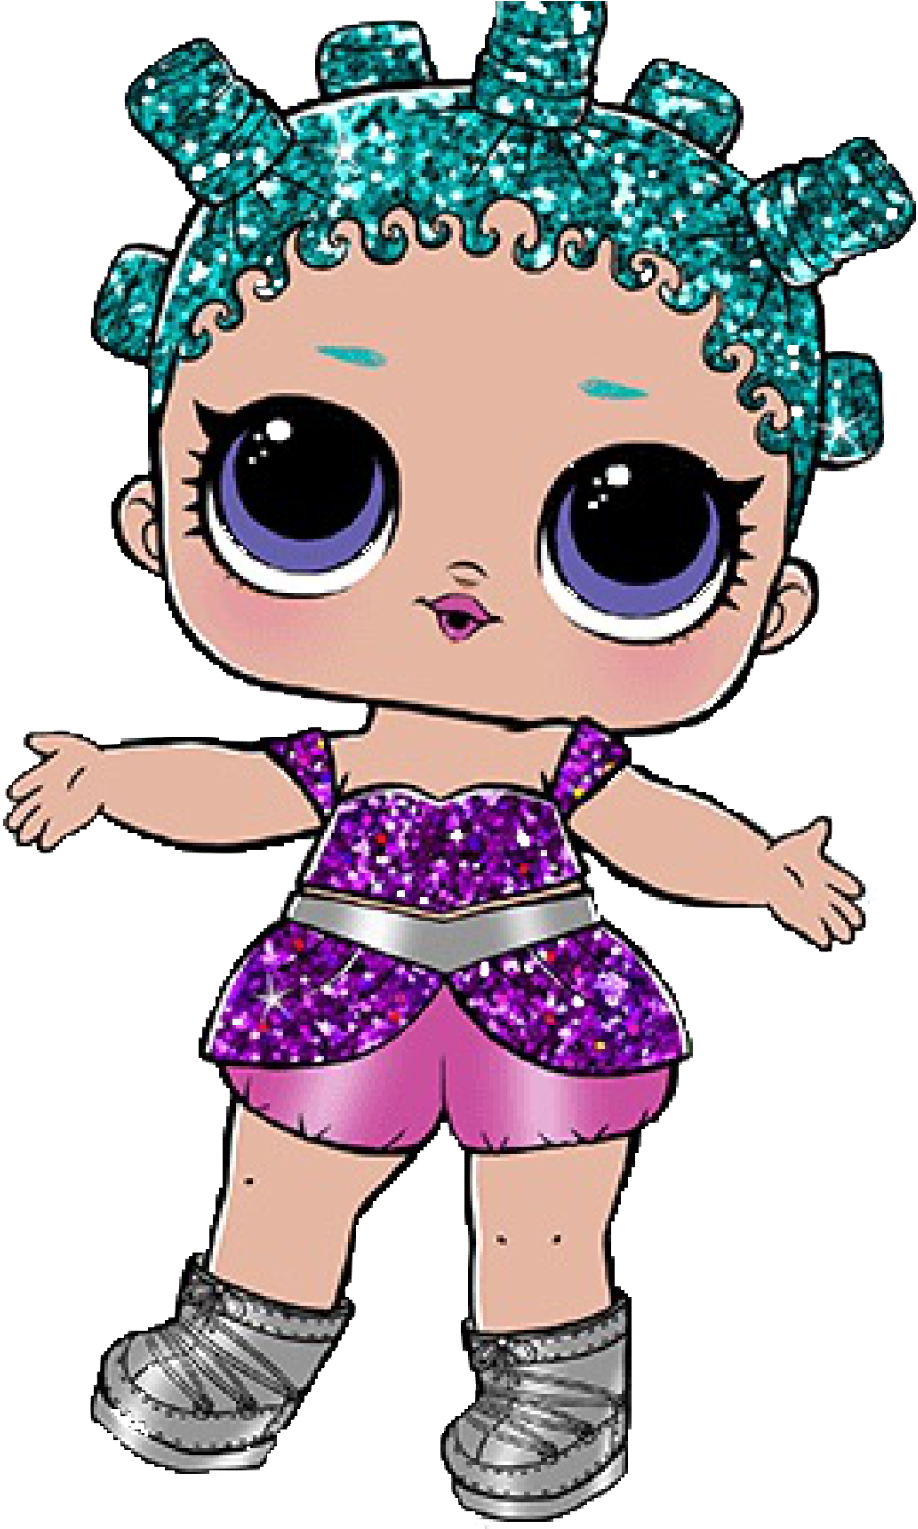 Download Transparent Lol Doll Png - Lol Surprise Dolls Png - ClipartKey